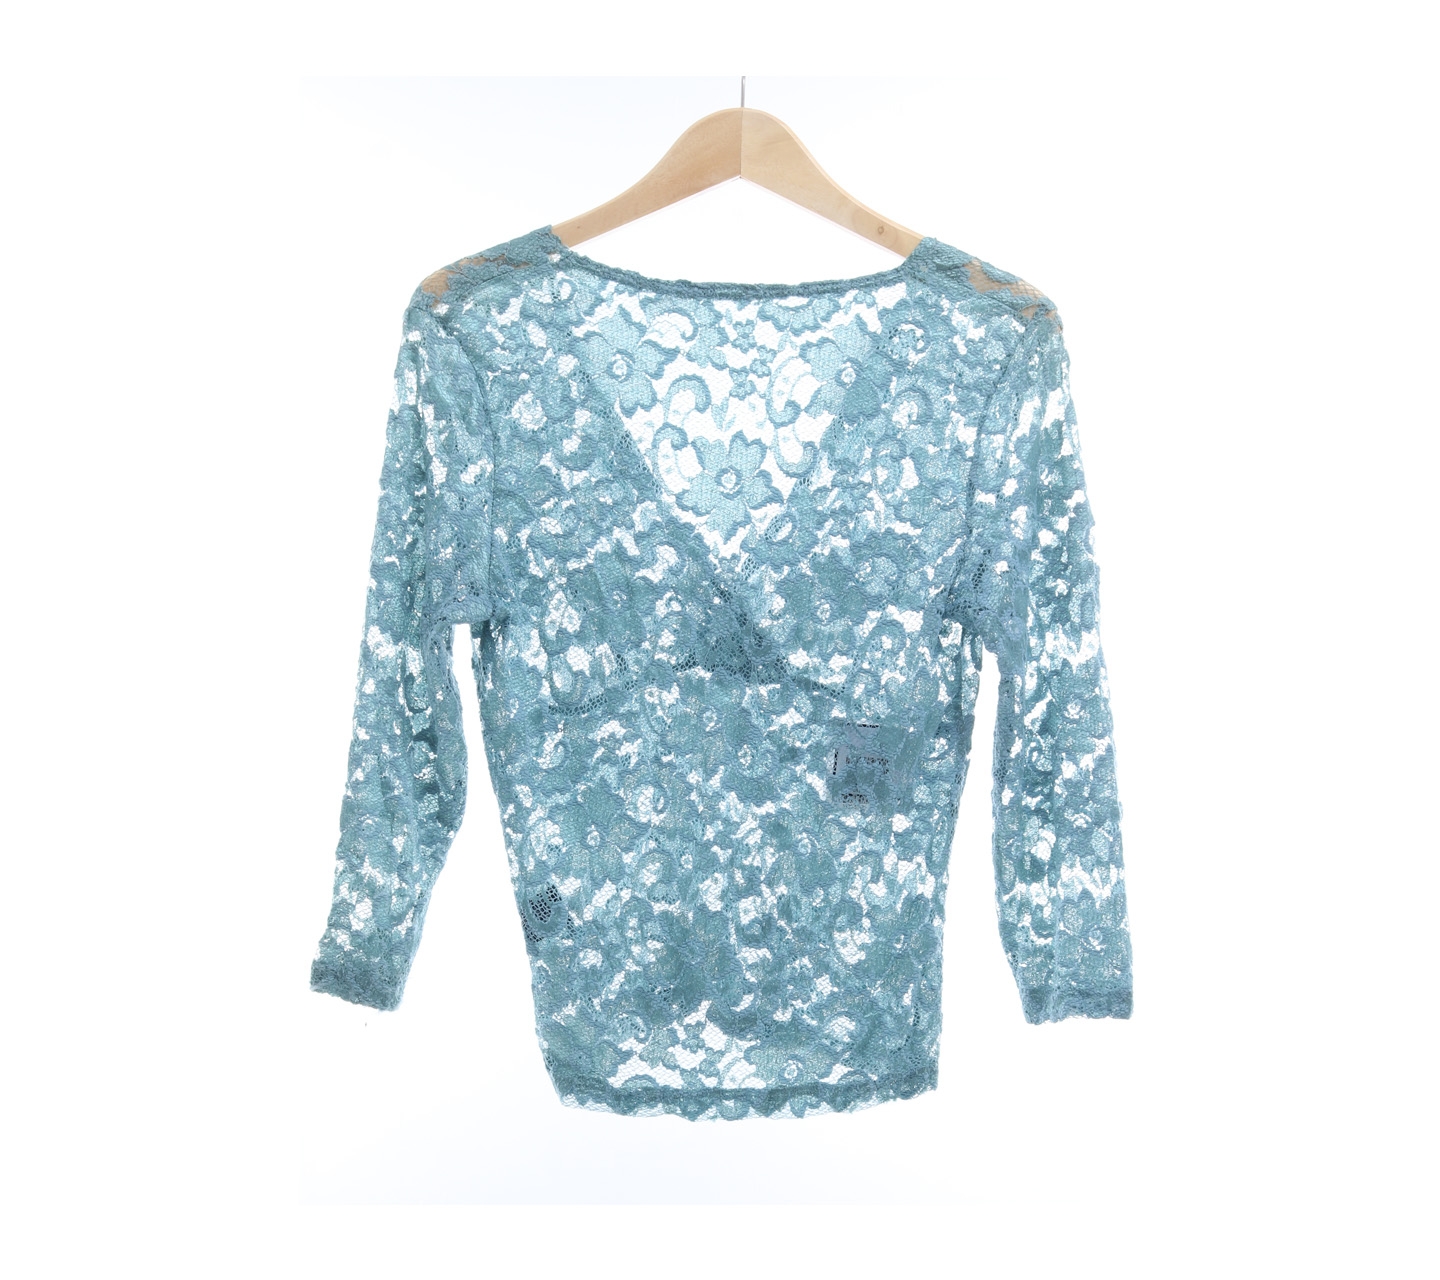 Events Patterned Lace Tosca Blouse